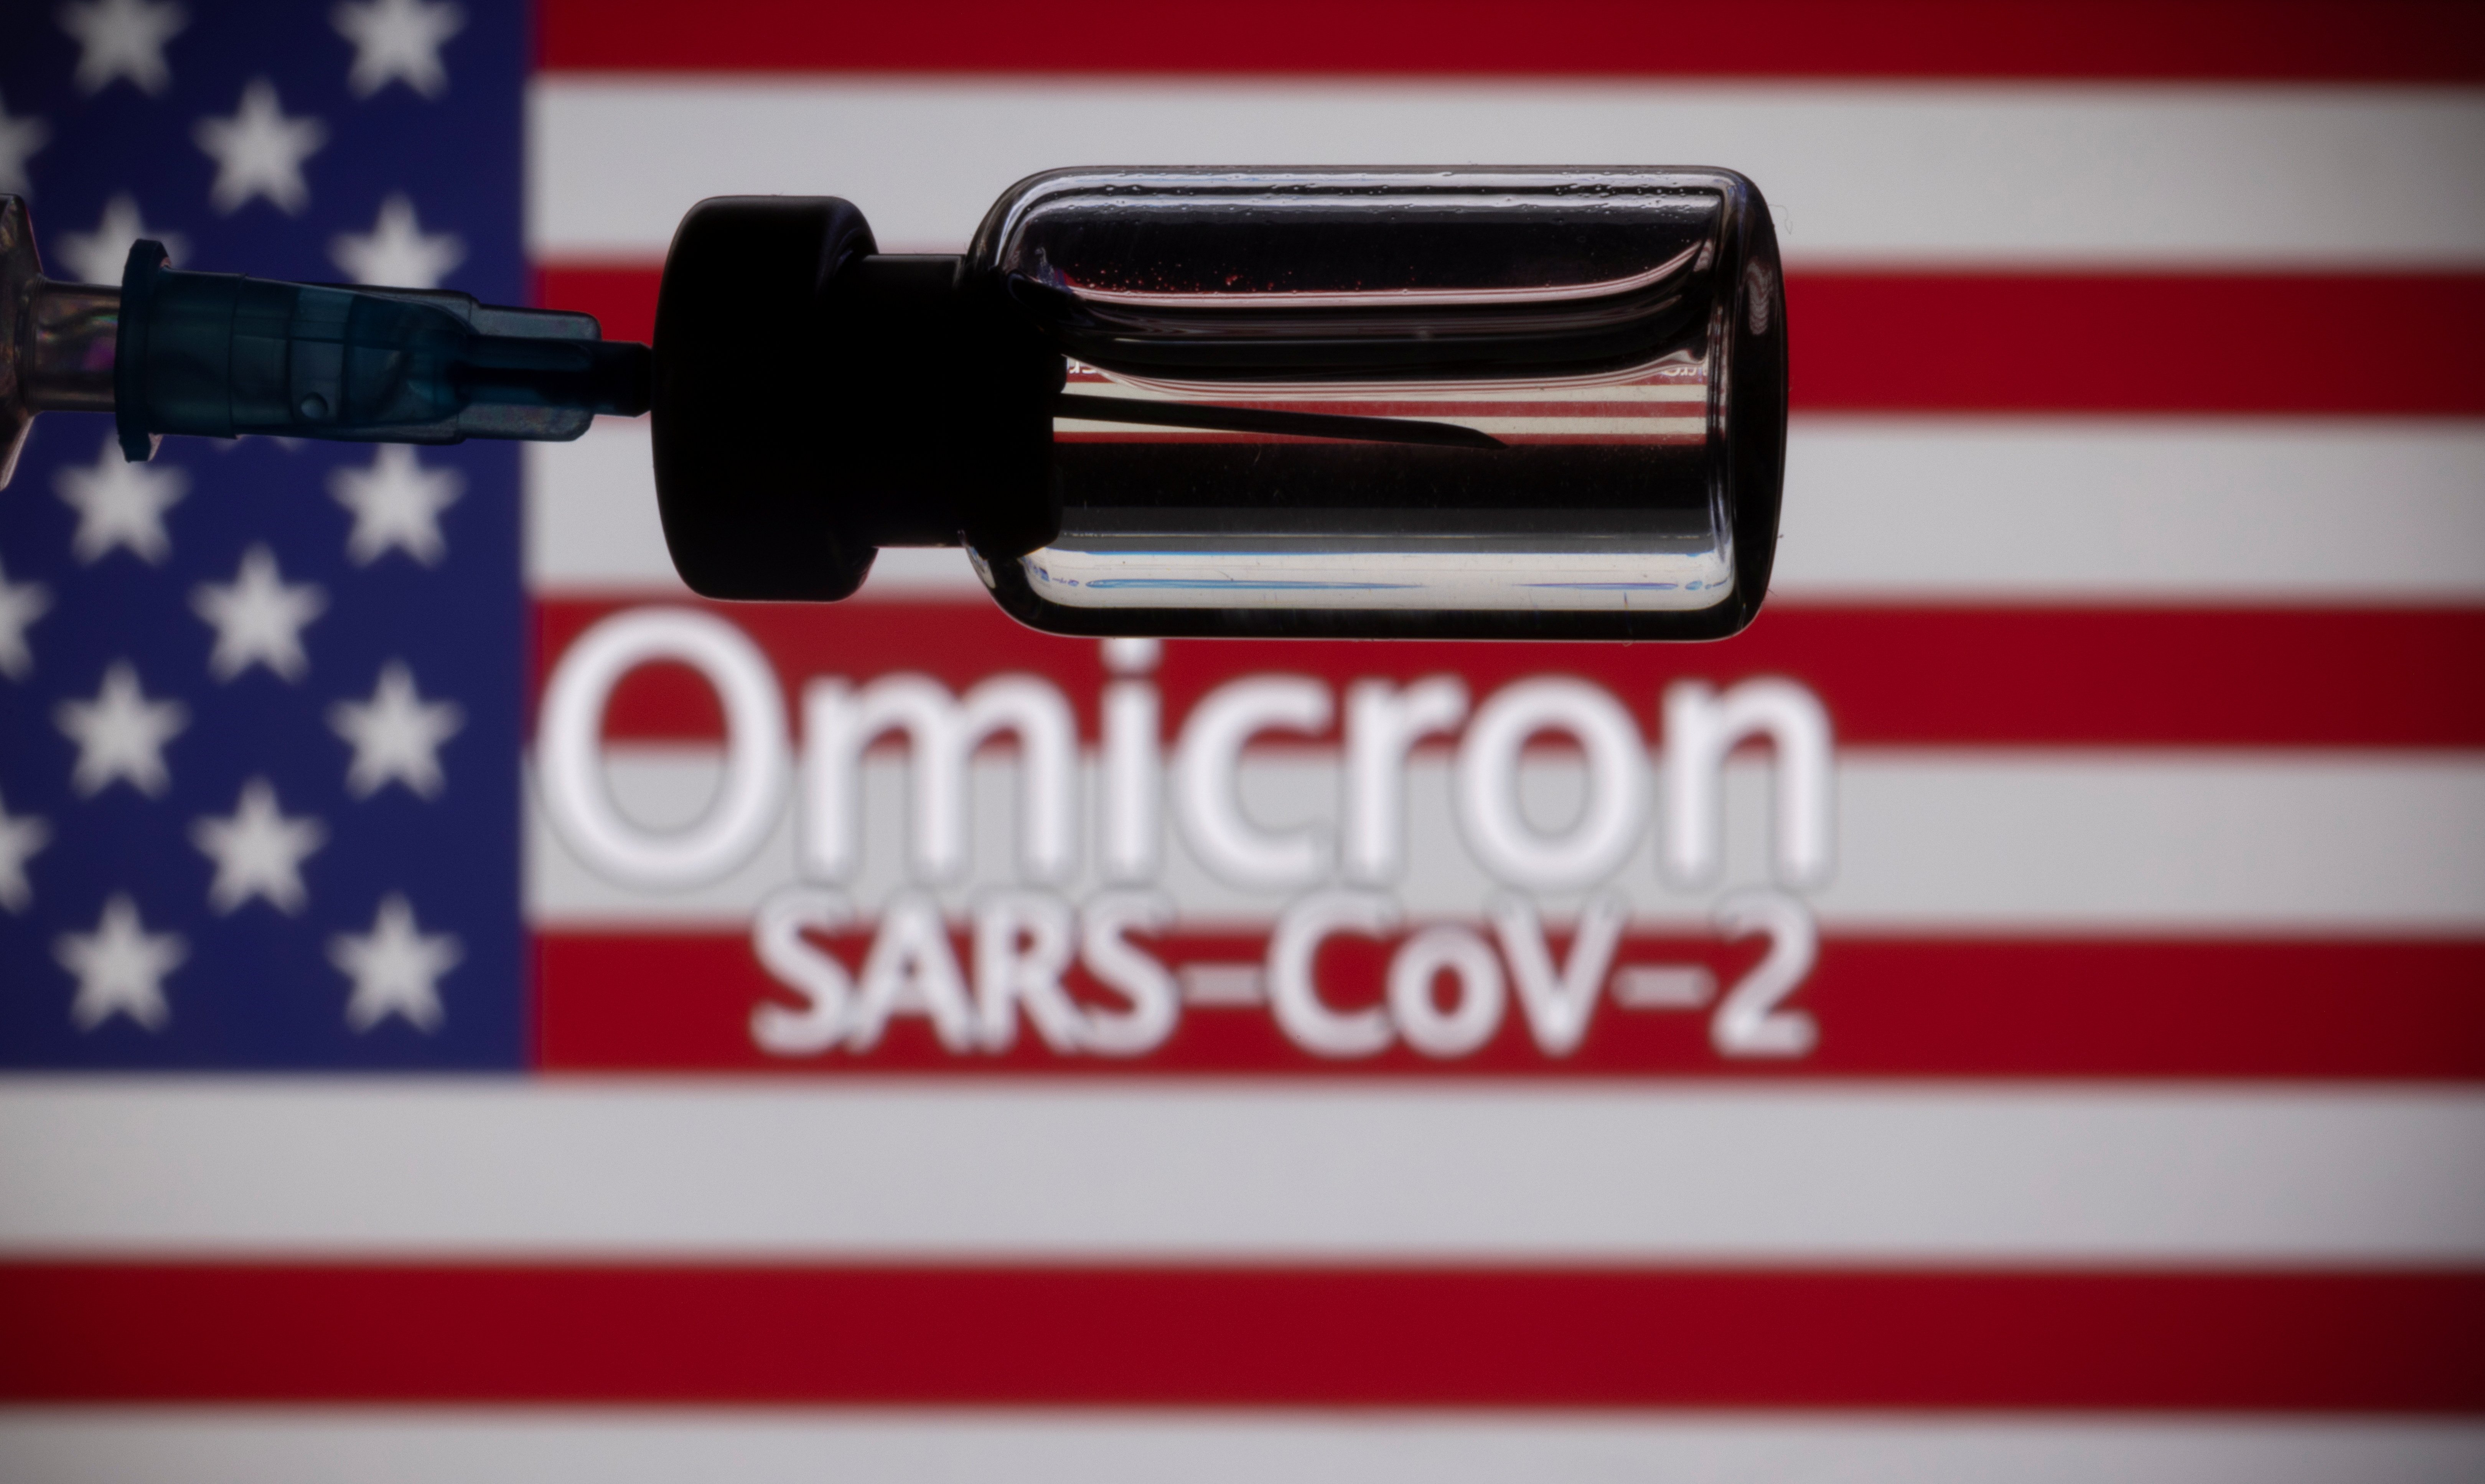 A vial, syringe and U.S. flag are seen in this illustration about a new variant of the coronavirus the medical world has labeled "Omicron." (CNS photo/Dado Ruvic, Reuters)